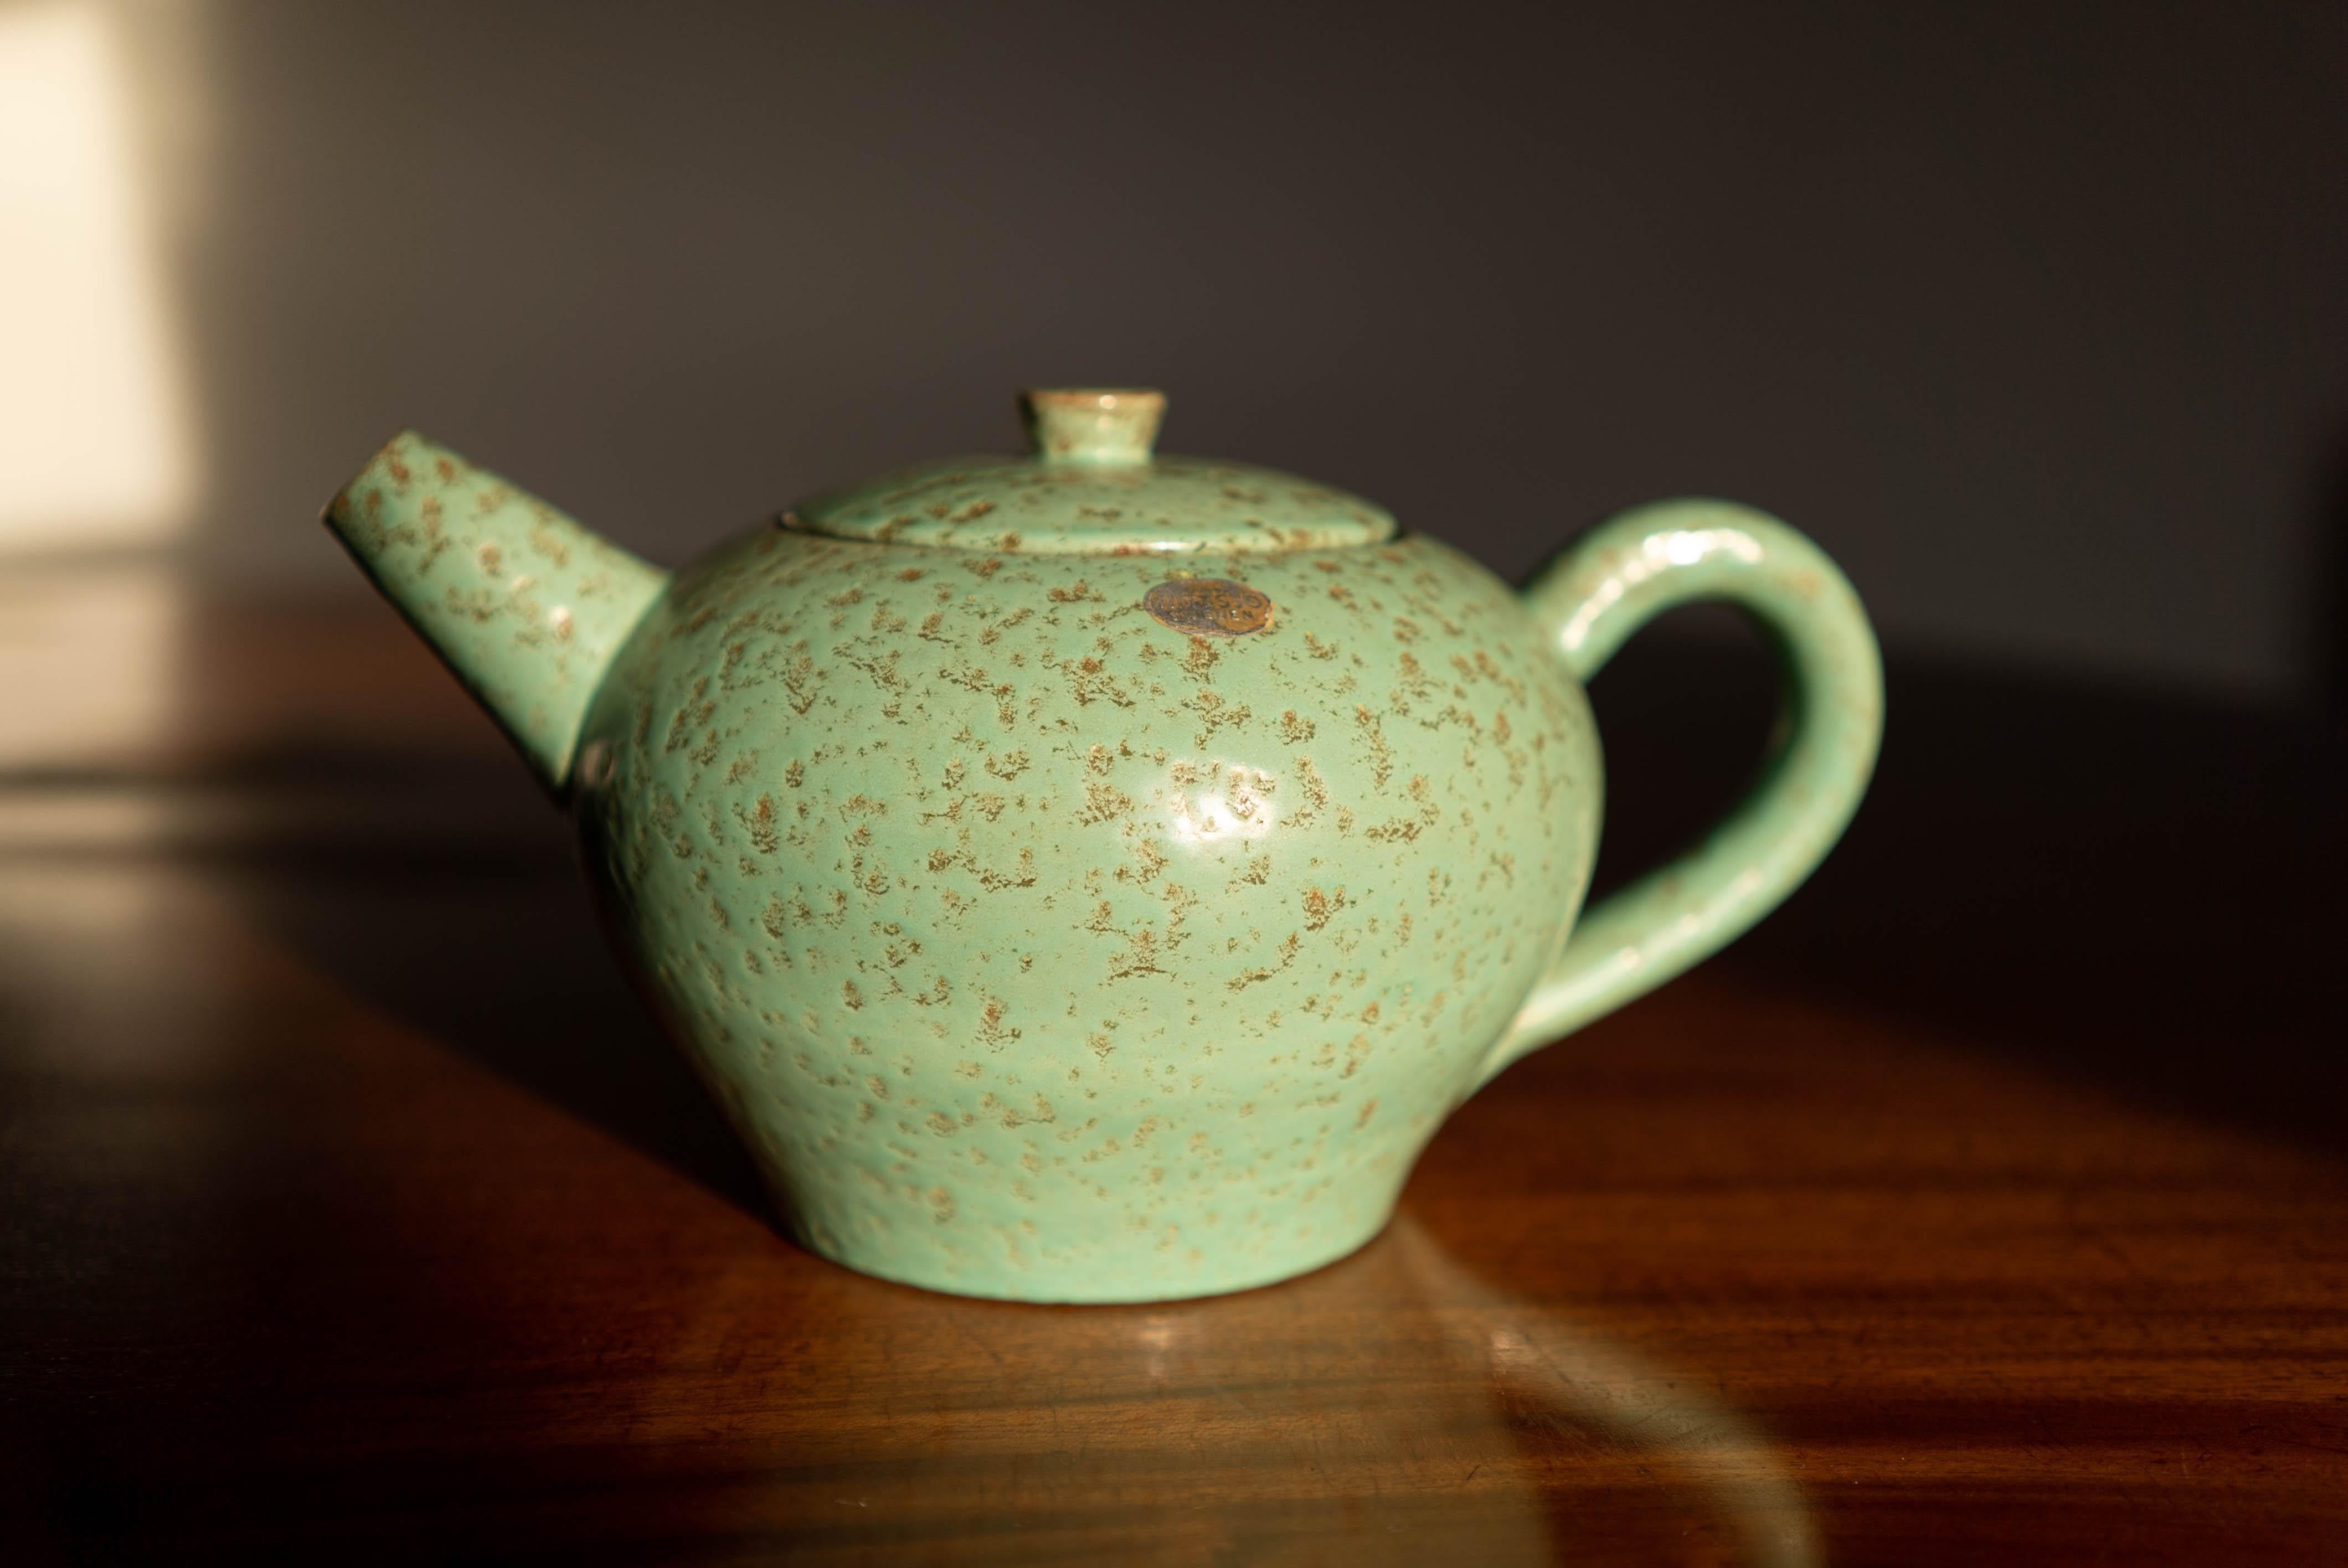 A teapot, designed by Jerk Werkmäster. Produced by Nittsjö, Sweden, 1940s. Stamped and signed.

Other designers of the period include Axel Salto, Paavo Tynell, Lisa Johansson-Pape, Carl-Harry Stålhane, and Gunnar Nylund.